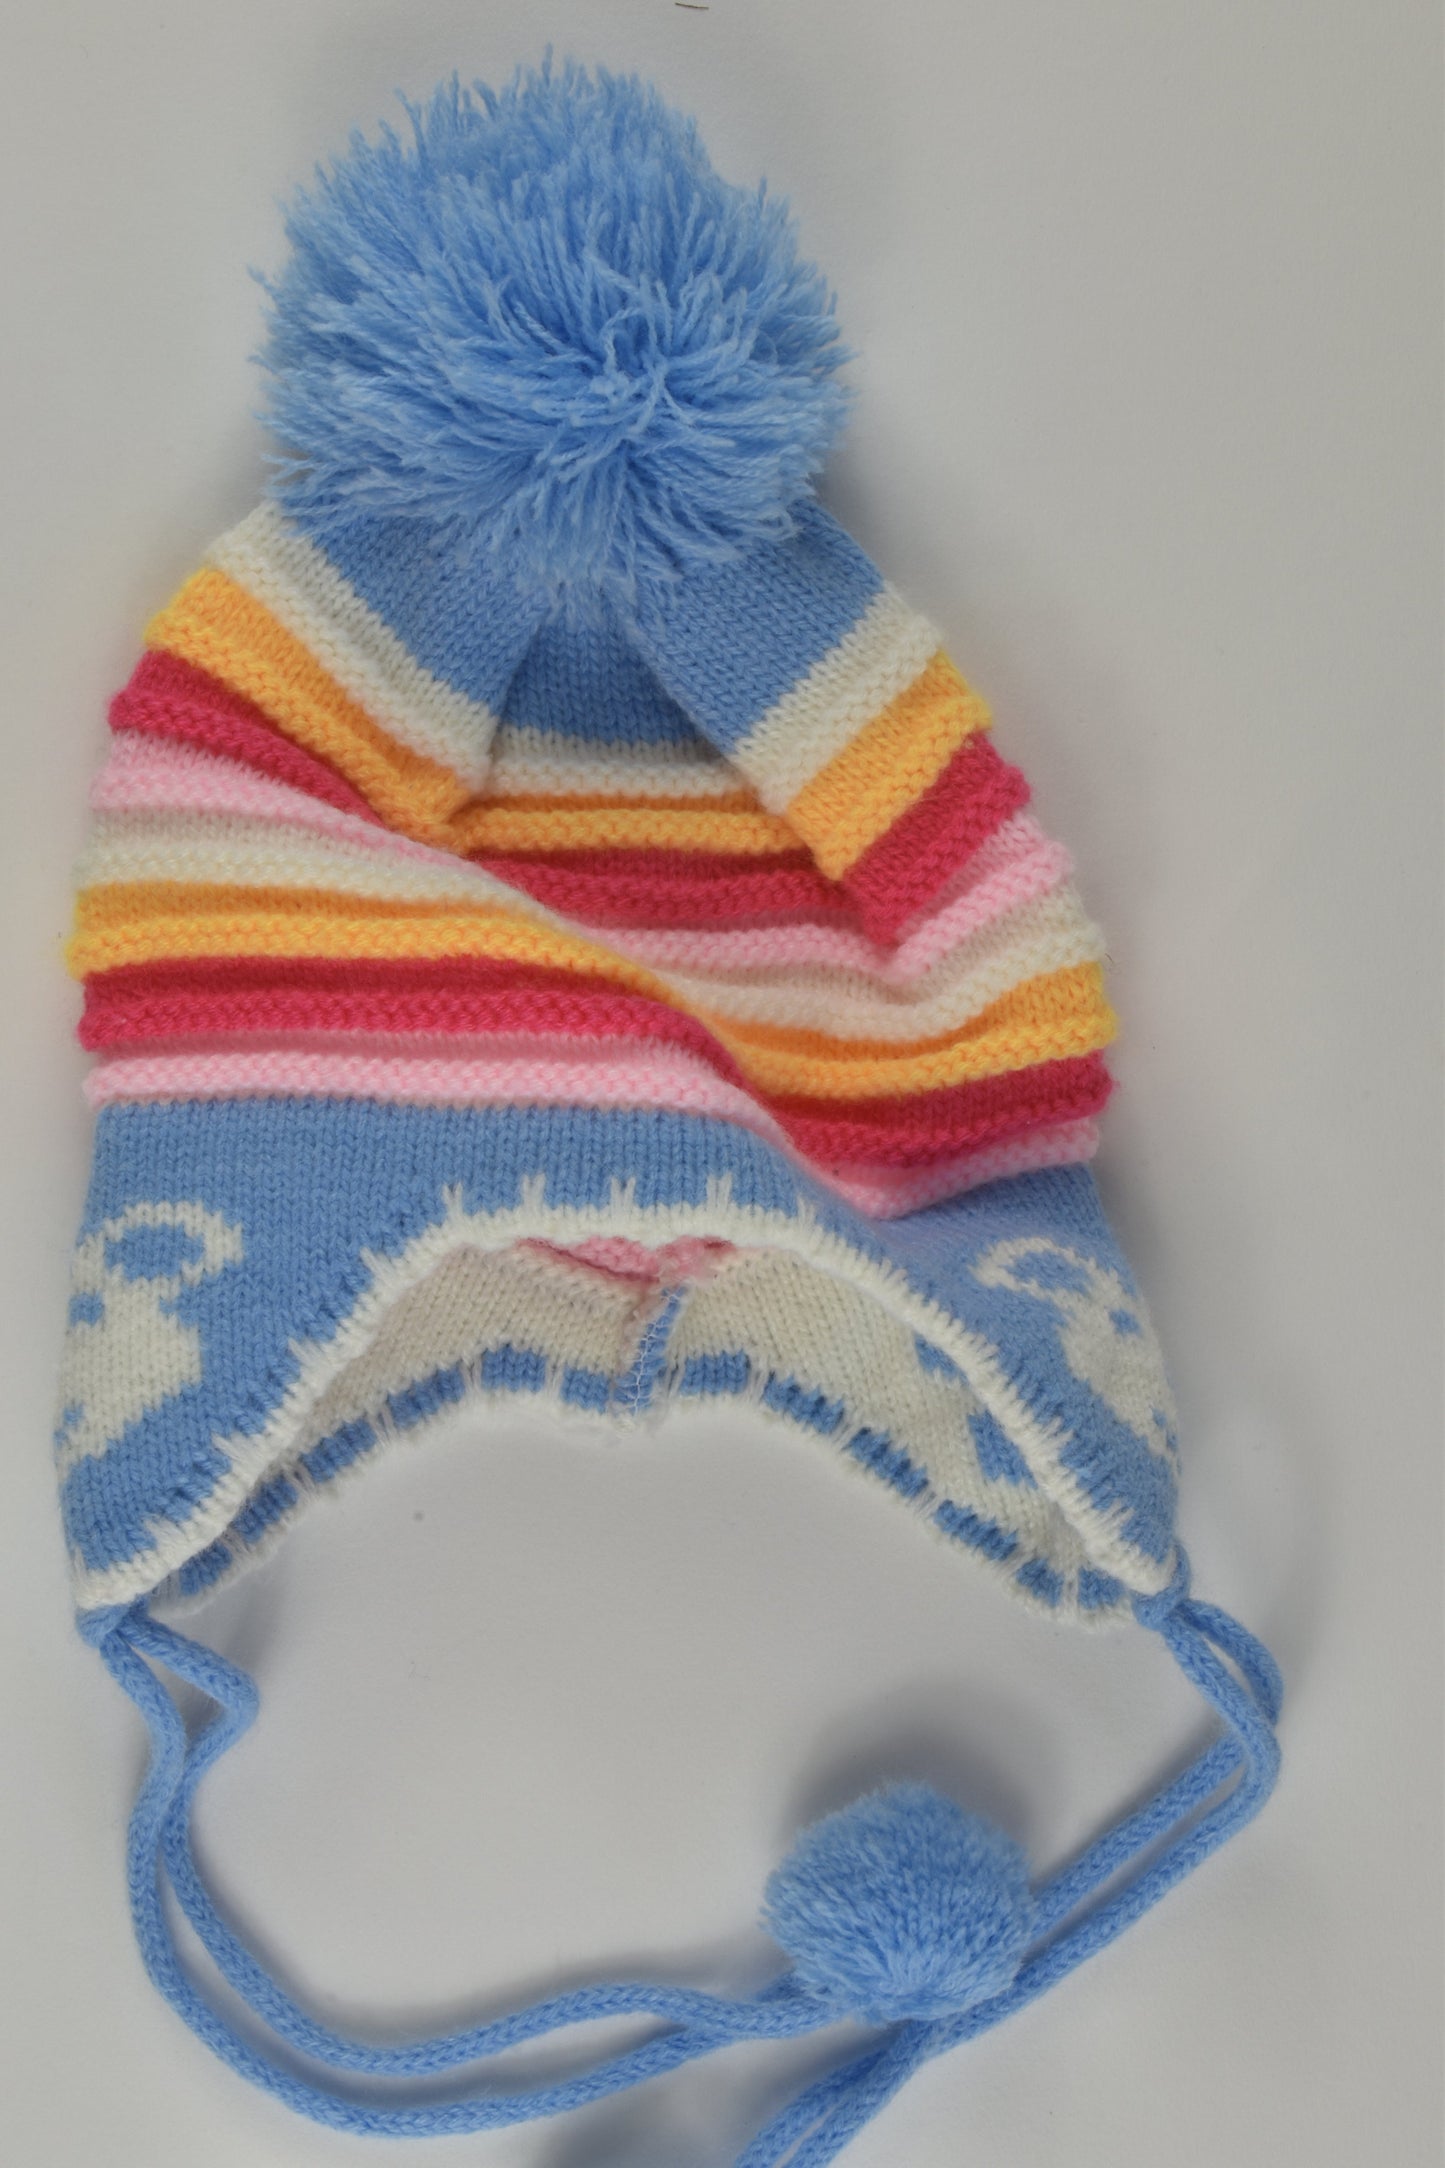 Brand Unknown Size approx 6-12 months Knit Beanie